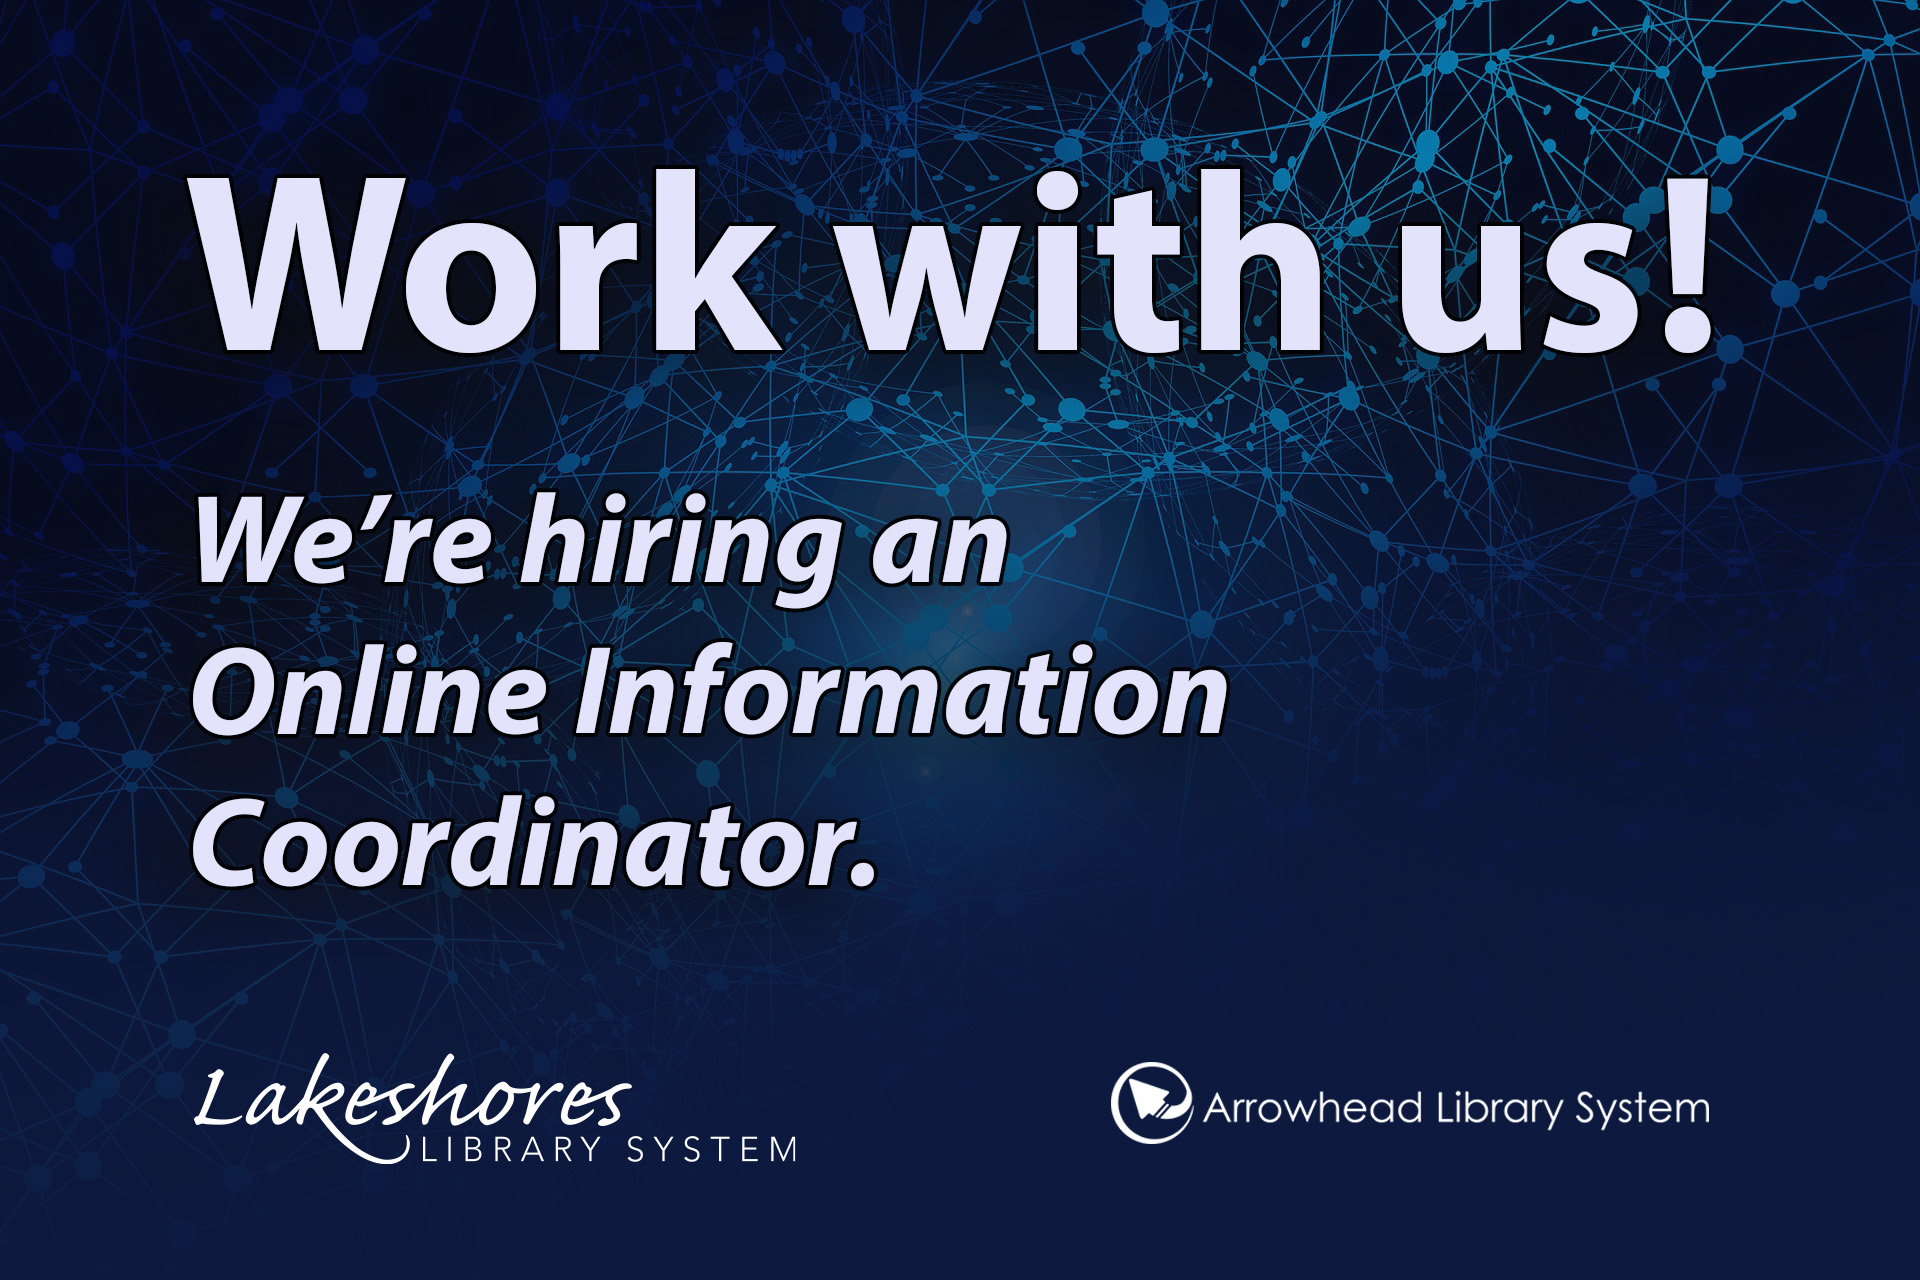 Image: digital circuitry, "Work with us! We're hiring an online information coordinator." logos for Lakeshores Library System and Arrowhead Library System.